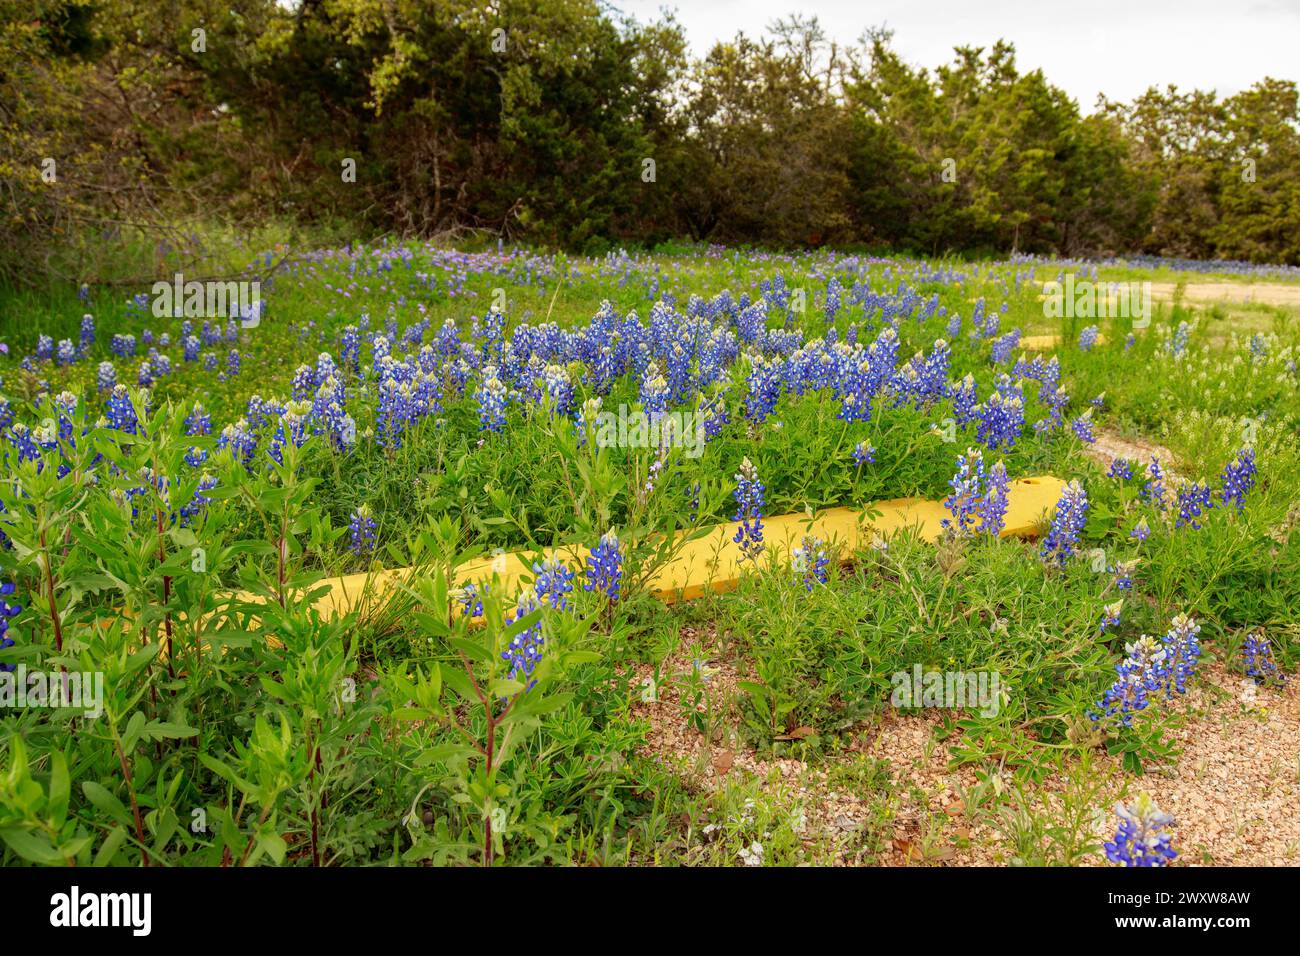 Vibrant bluebonnets are flourishing along a yellow-painted curb and parking lot amidst a green field and roadside patch of wildflowers Stock Photo